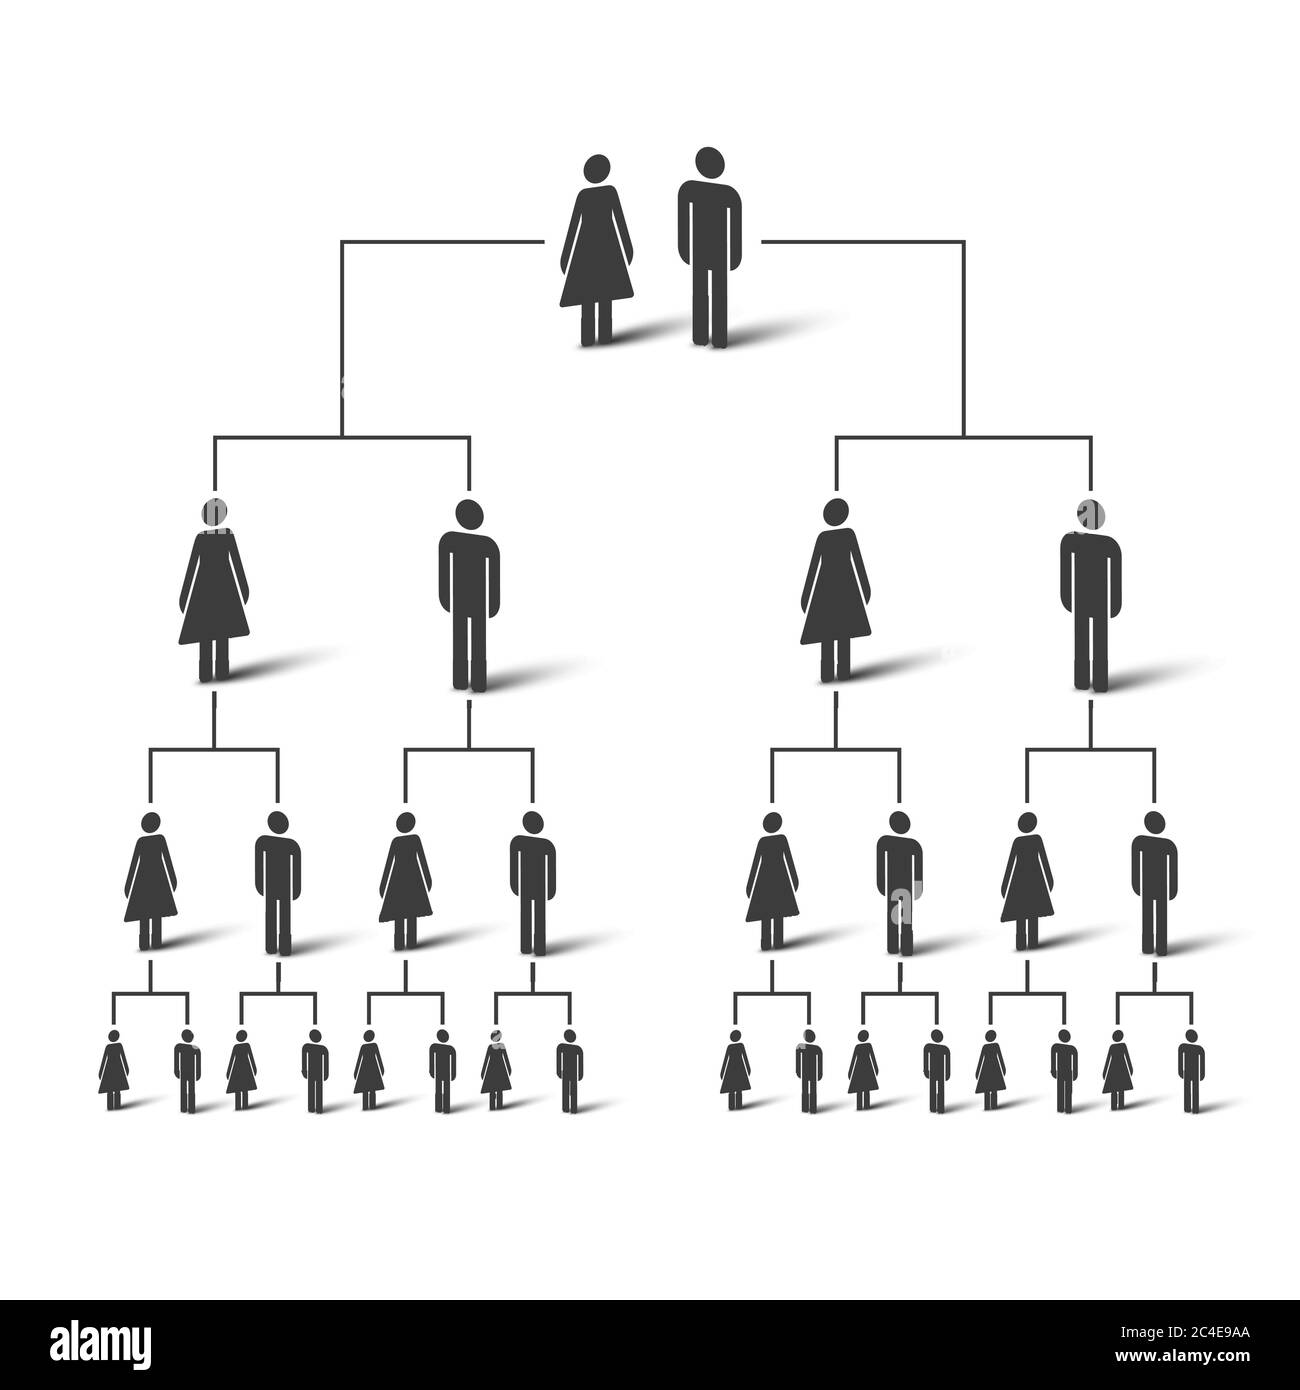 Genealogical tree. Family tree diagram. People simple icons. Vector illustration. Stock Vector